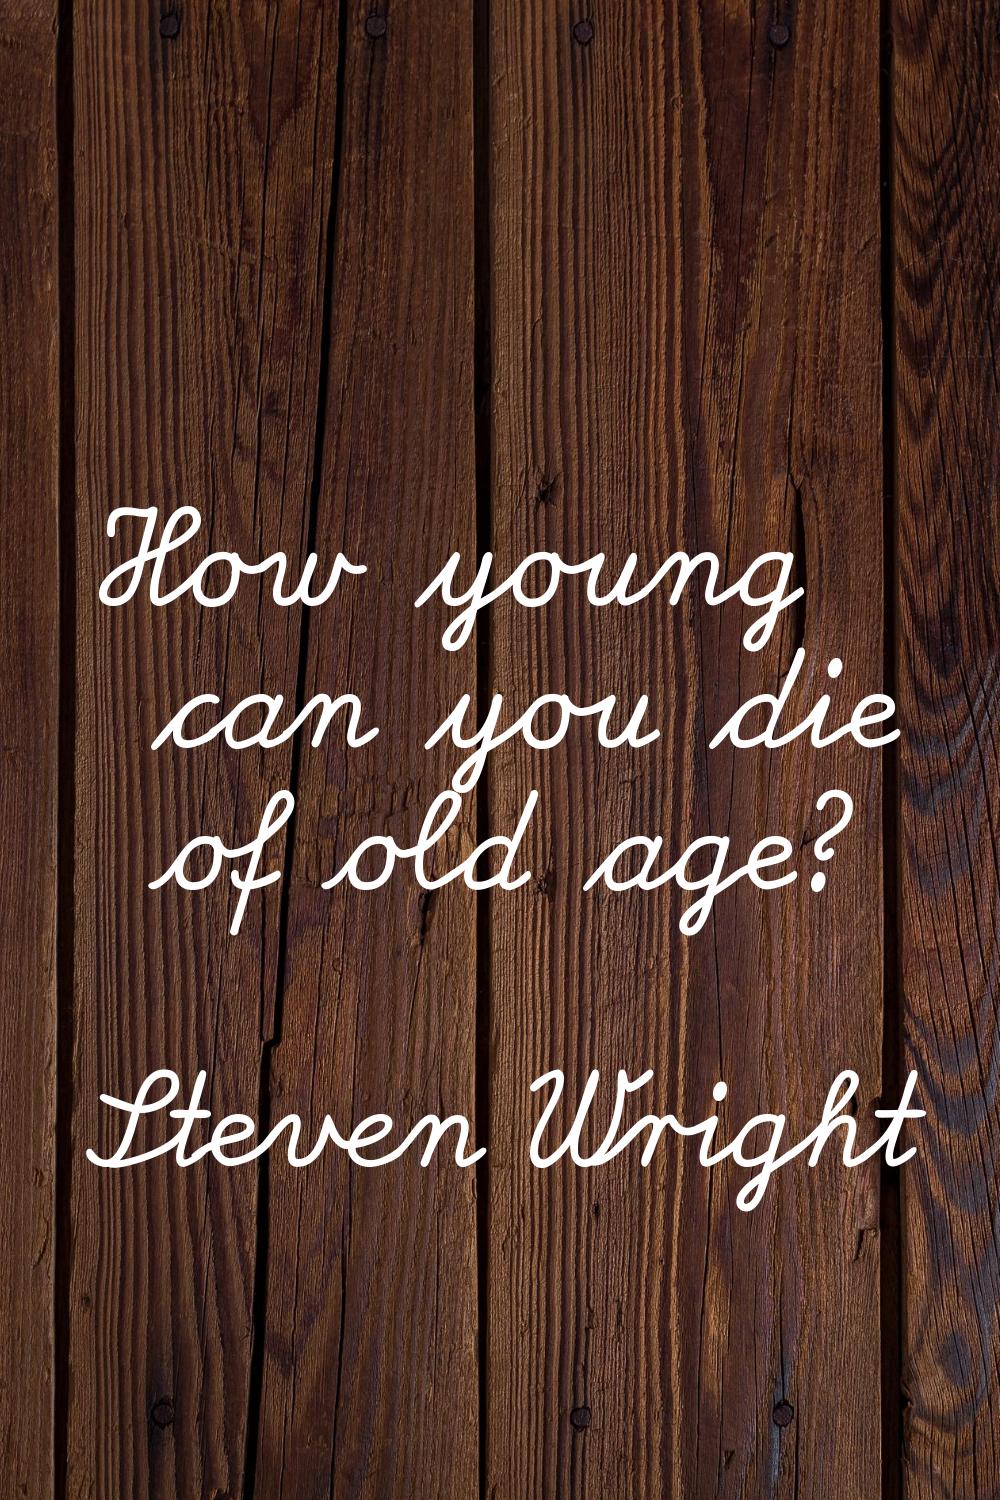 How young can you die of old age?